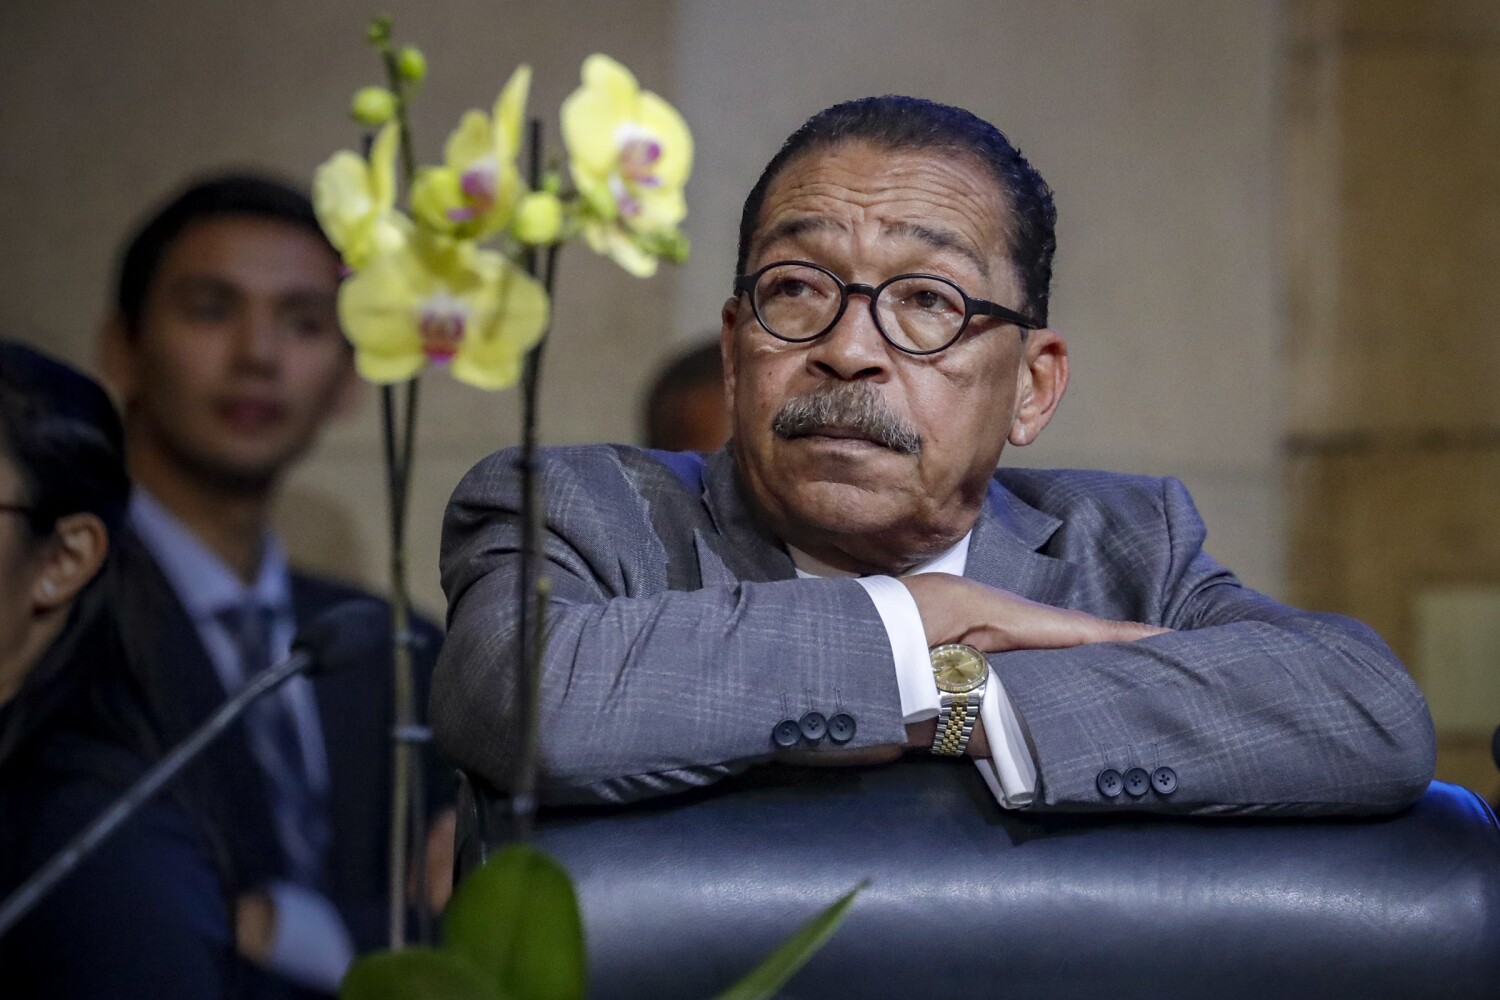 Herb Wesson resigns his post as a temporary L.A. councilman